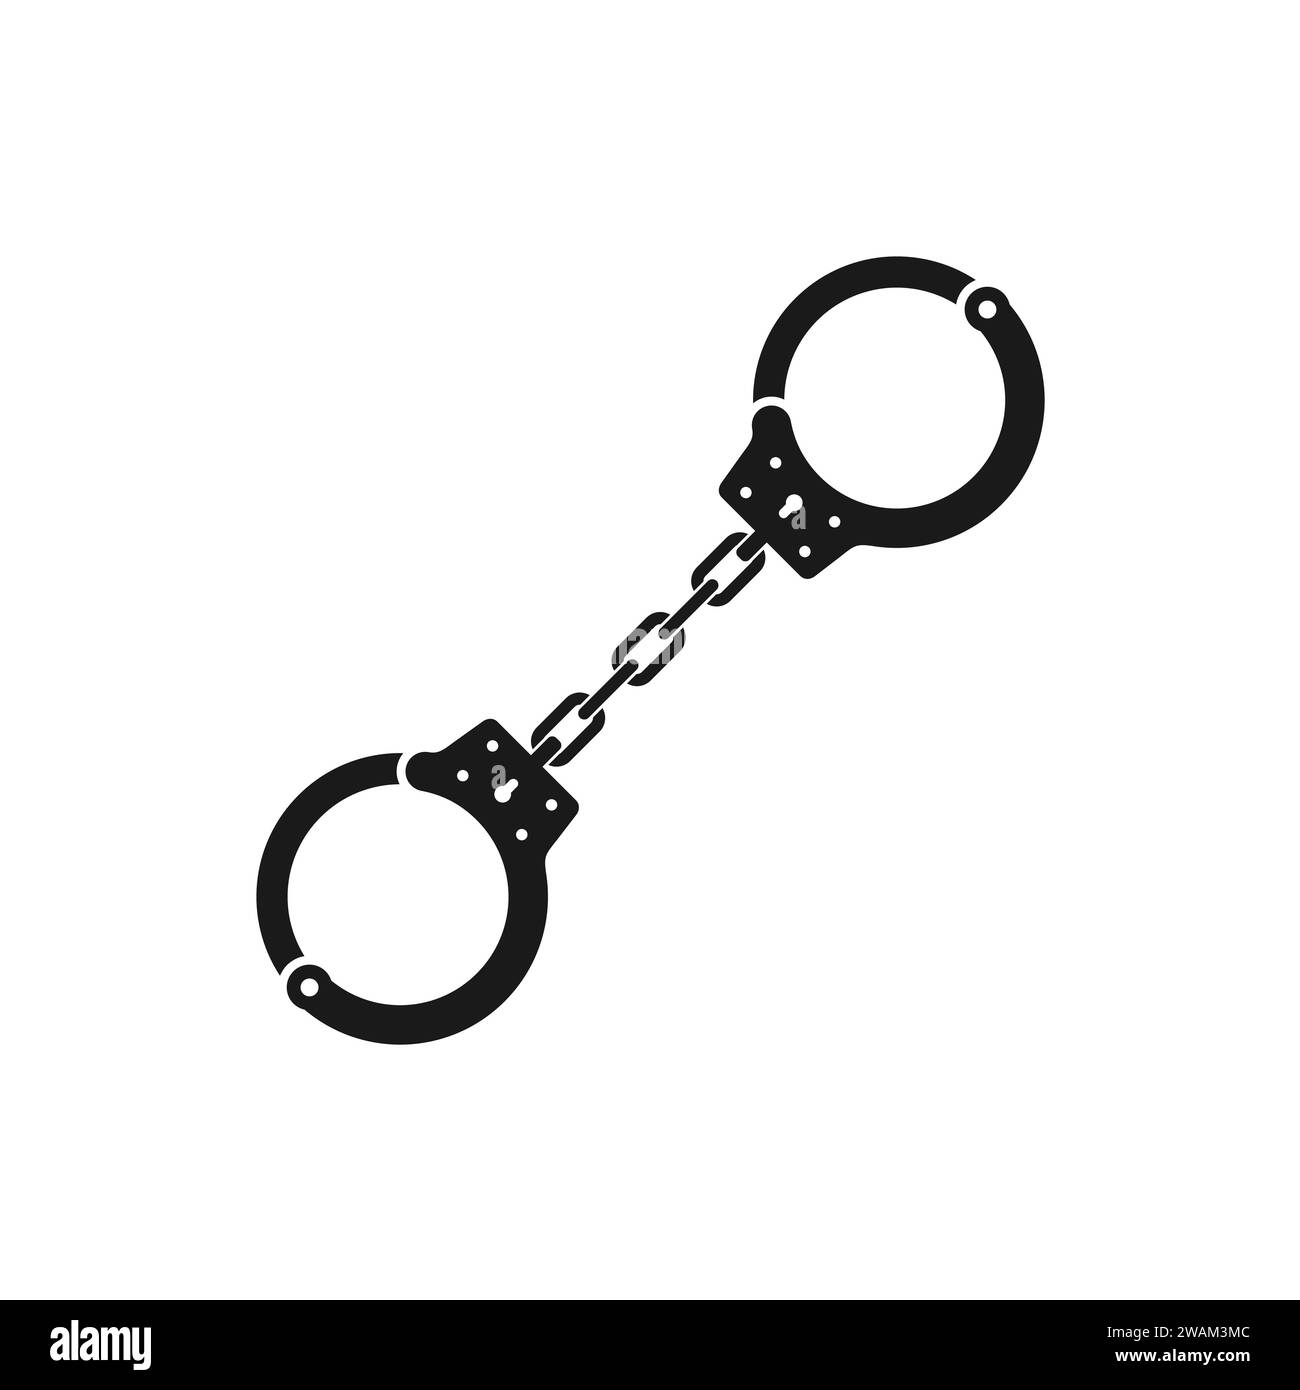 Handcuffs icon for detaining criminals isolated on white background. Outfit of a policeman. Element of police and prison icon of arrest of offender. R Stock Vector